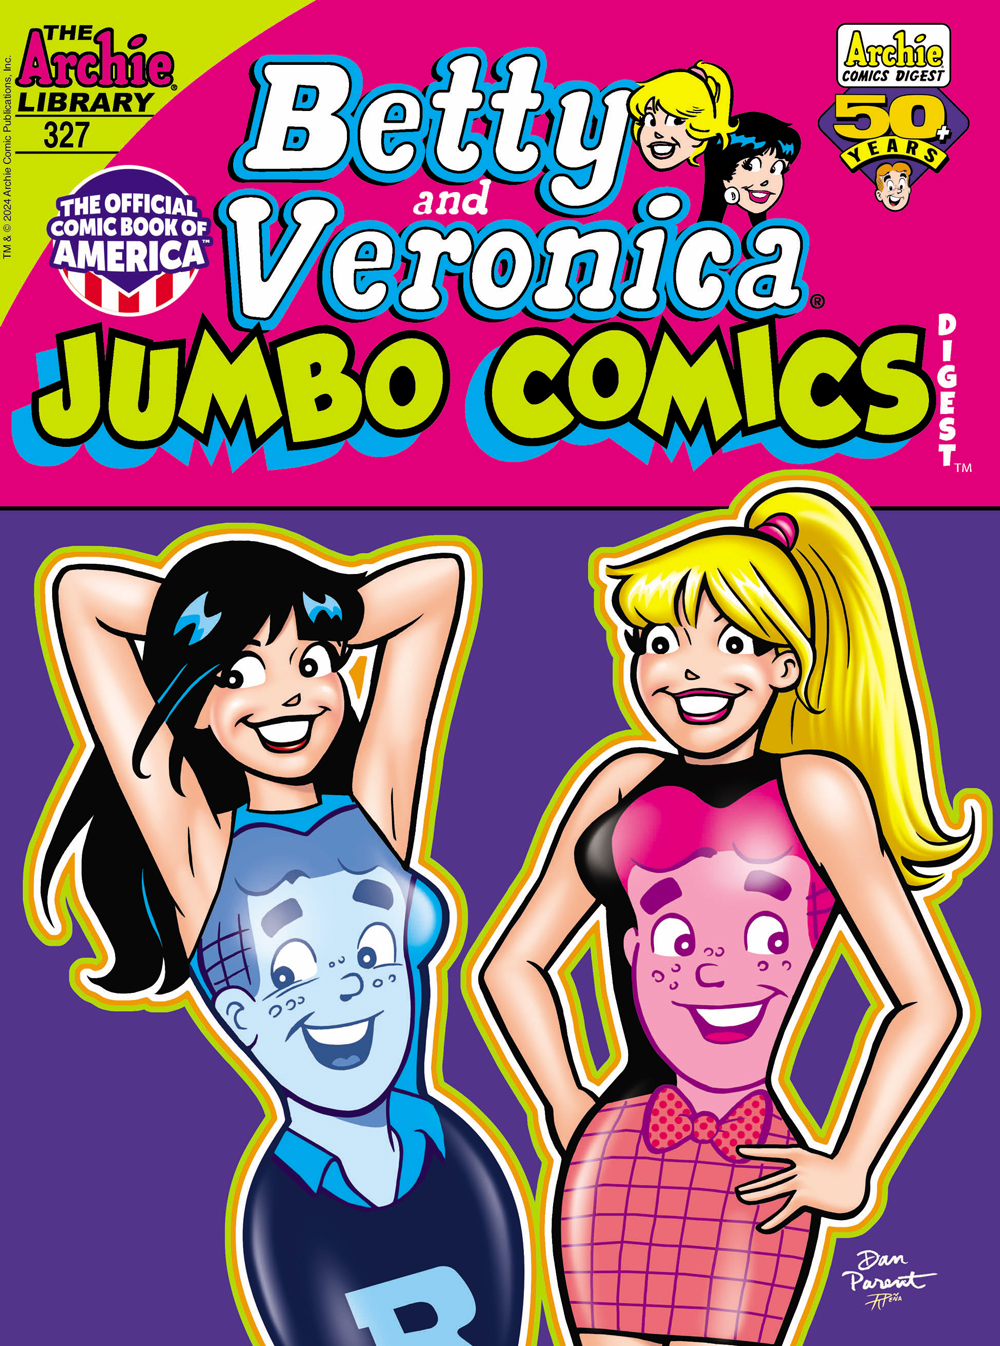 Betty and Veronica smile at the viewer. Each wears a black bodysuit with an image of Archie printed on it.